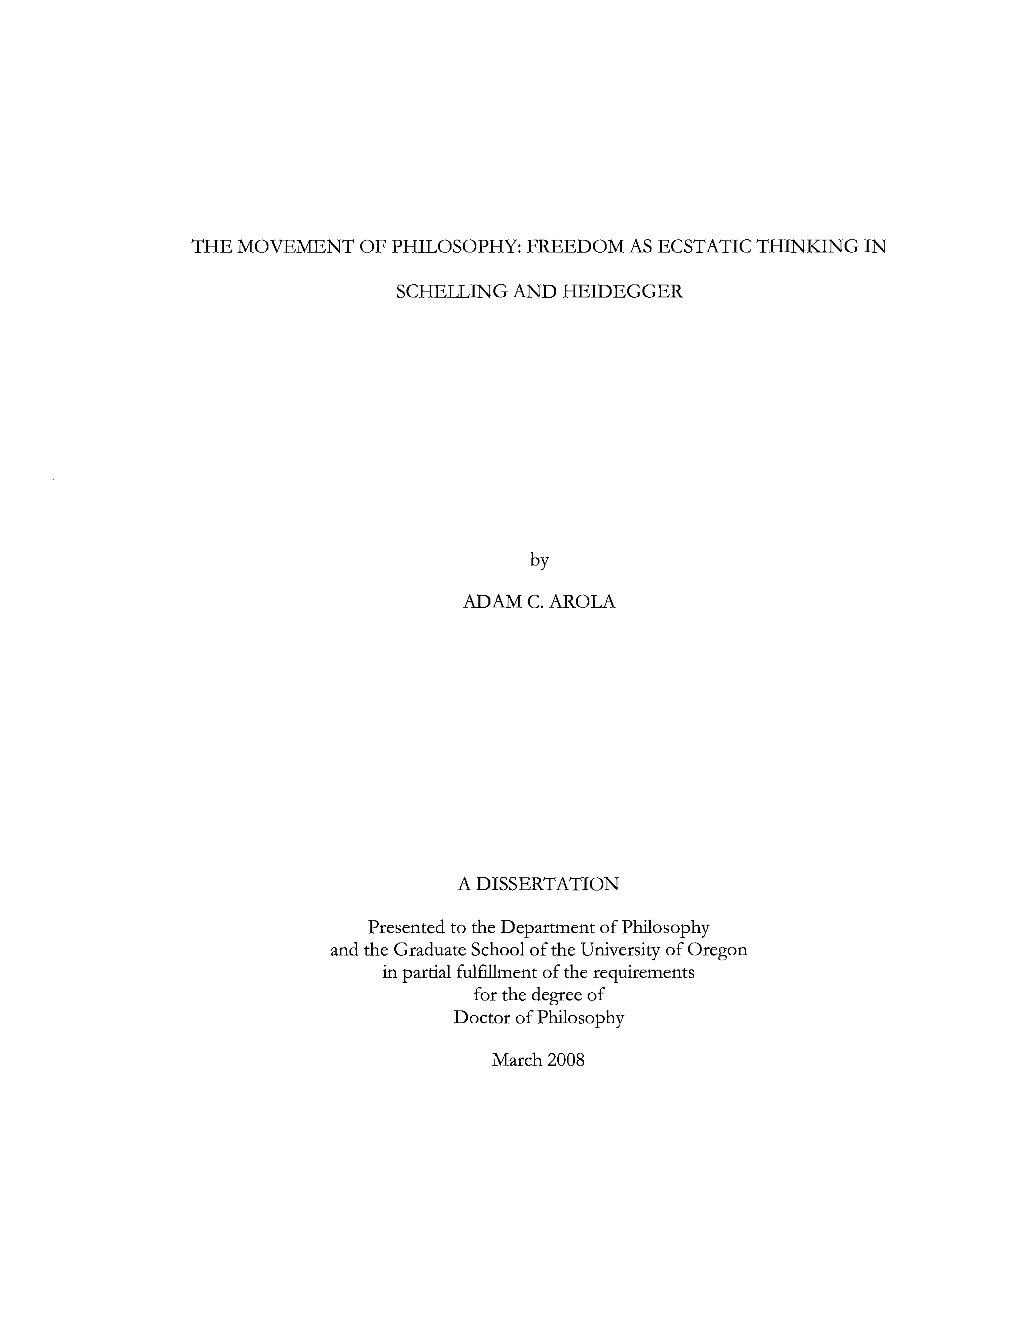 THE MOVEMENT of PHILOSOPHY: FREEDOM AS ECSTATIC THINKING in SCHELLING and HEIDEGGER by ADAM C. AROLA a DISSERTATION Present